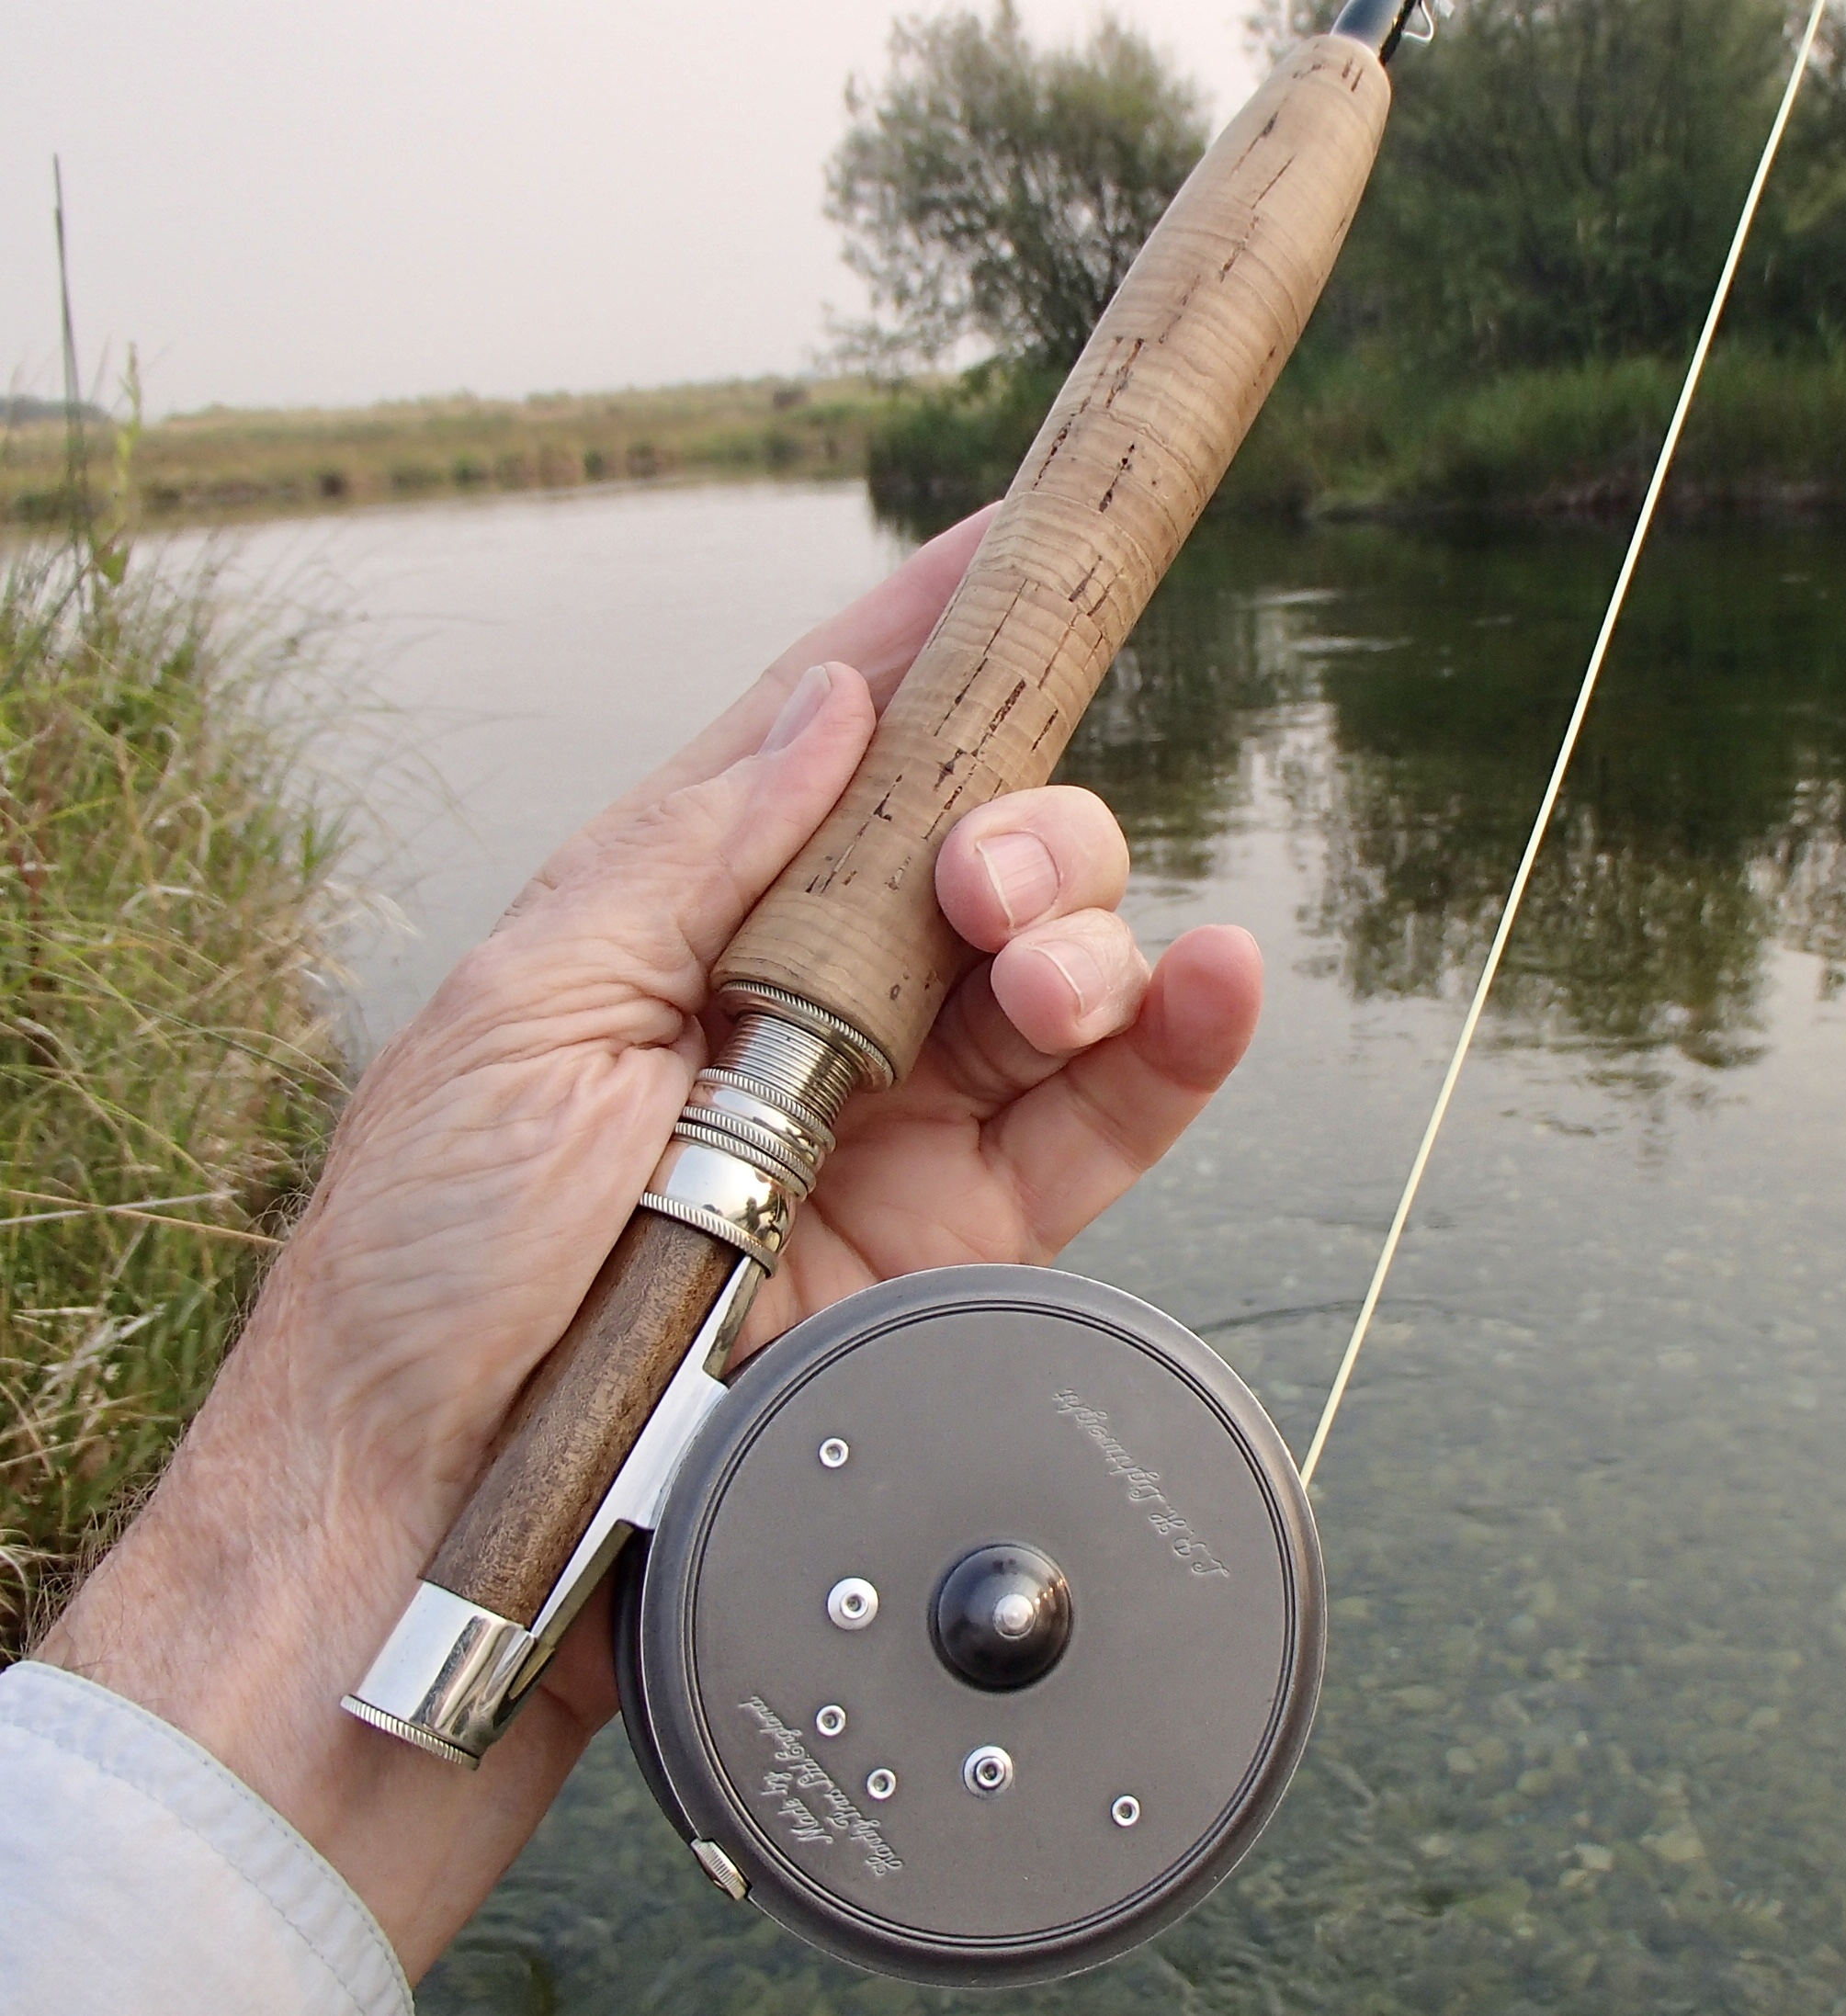 The one rod you'd never part with?, Fishing with Fiberglass Fly Rods